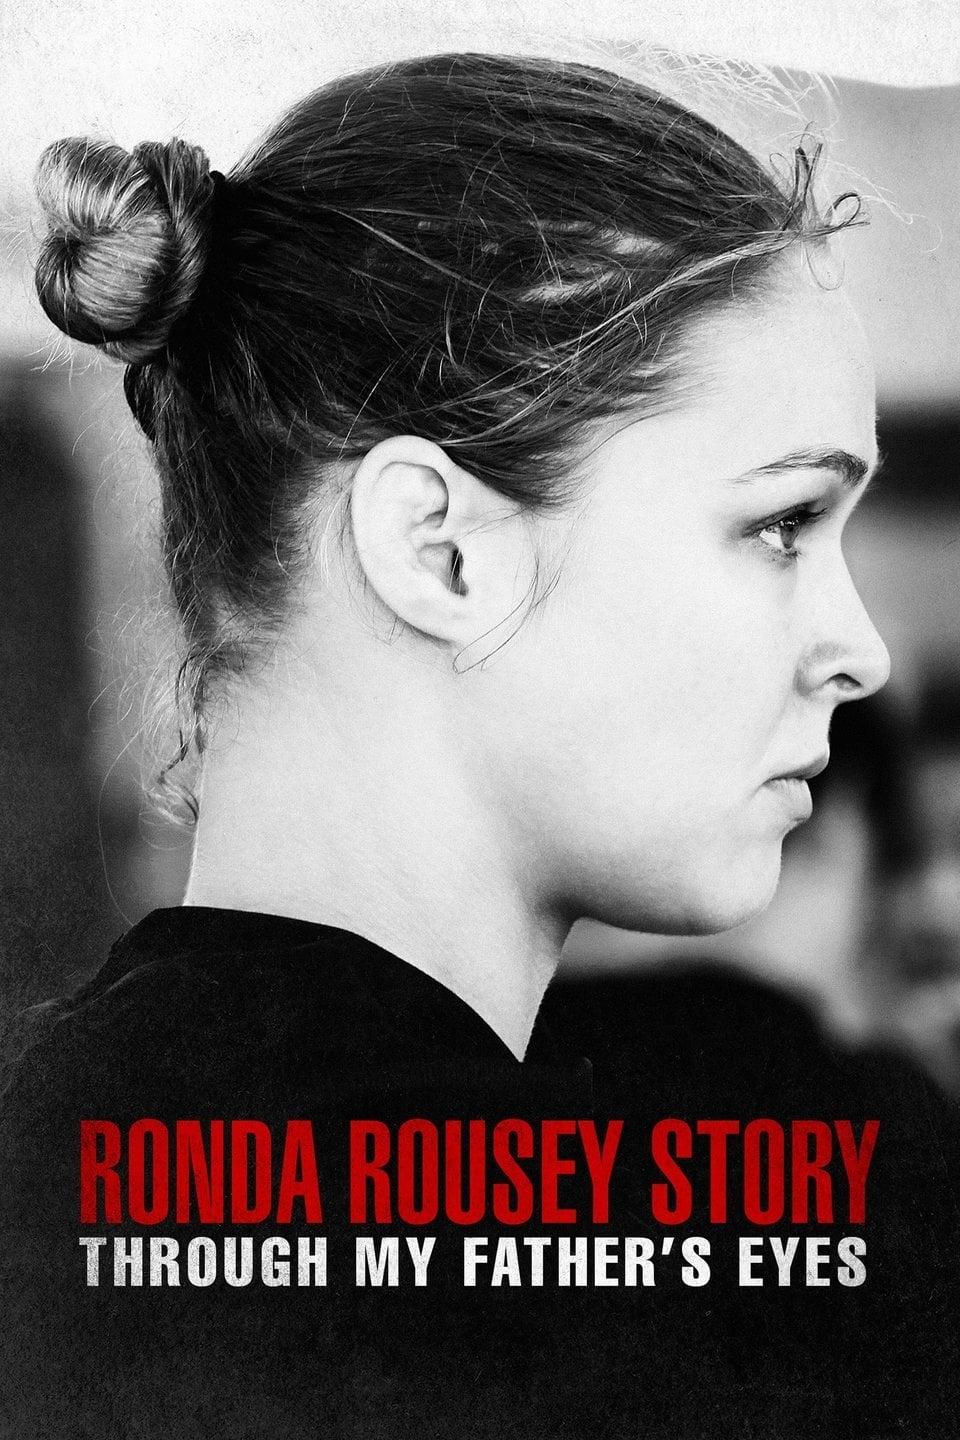 The Ronda Rousey Story: Through My Father's Eyes poster